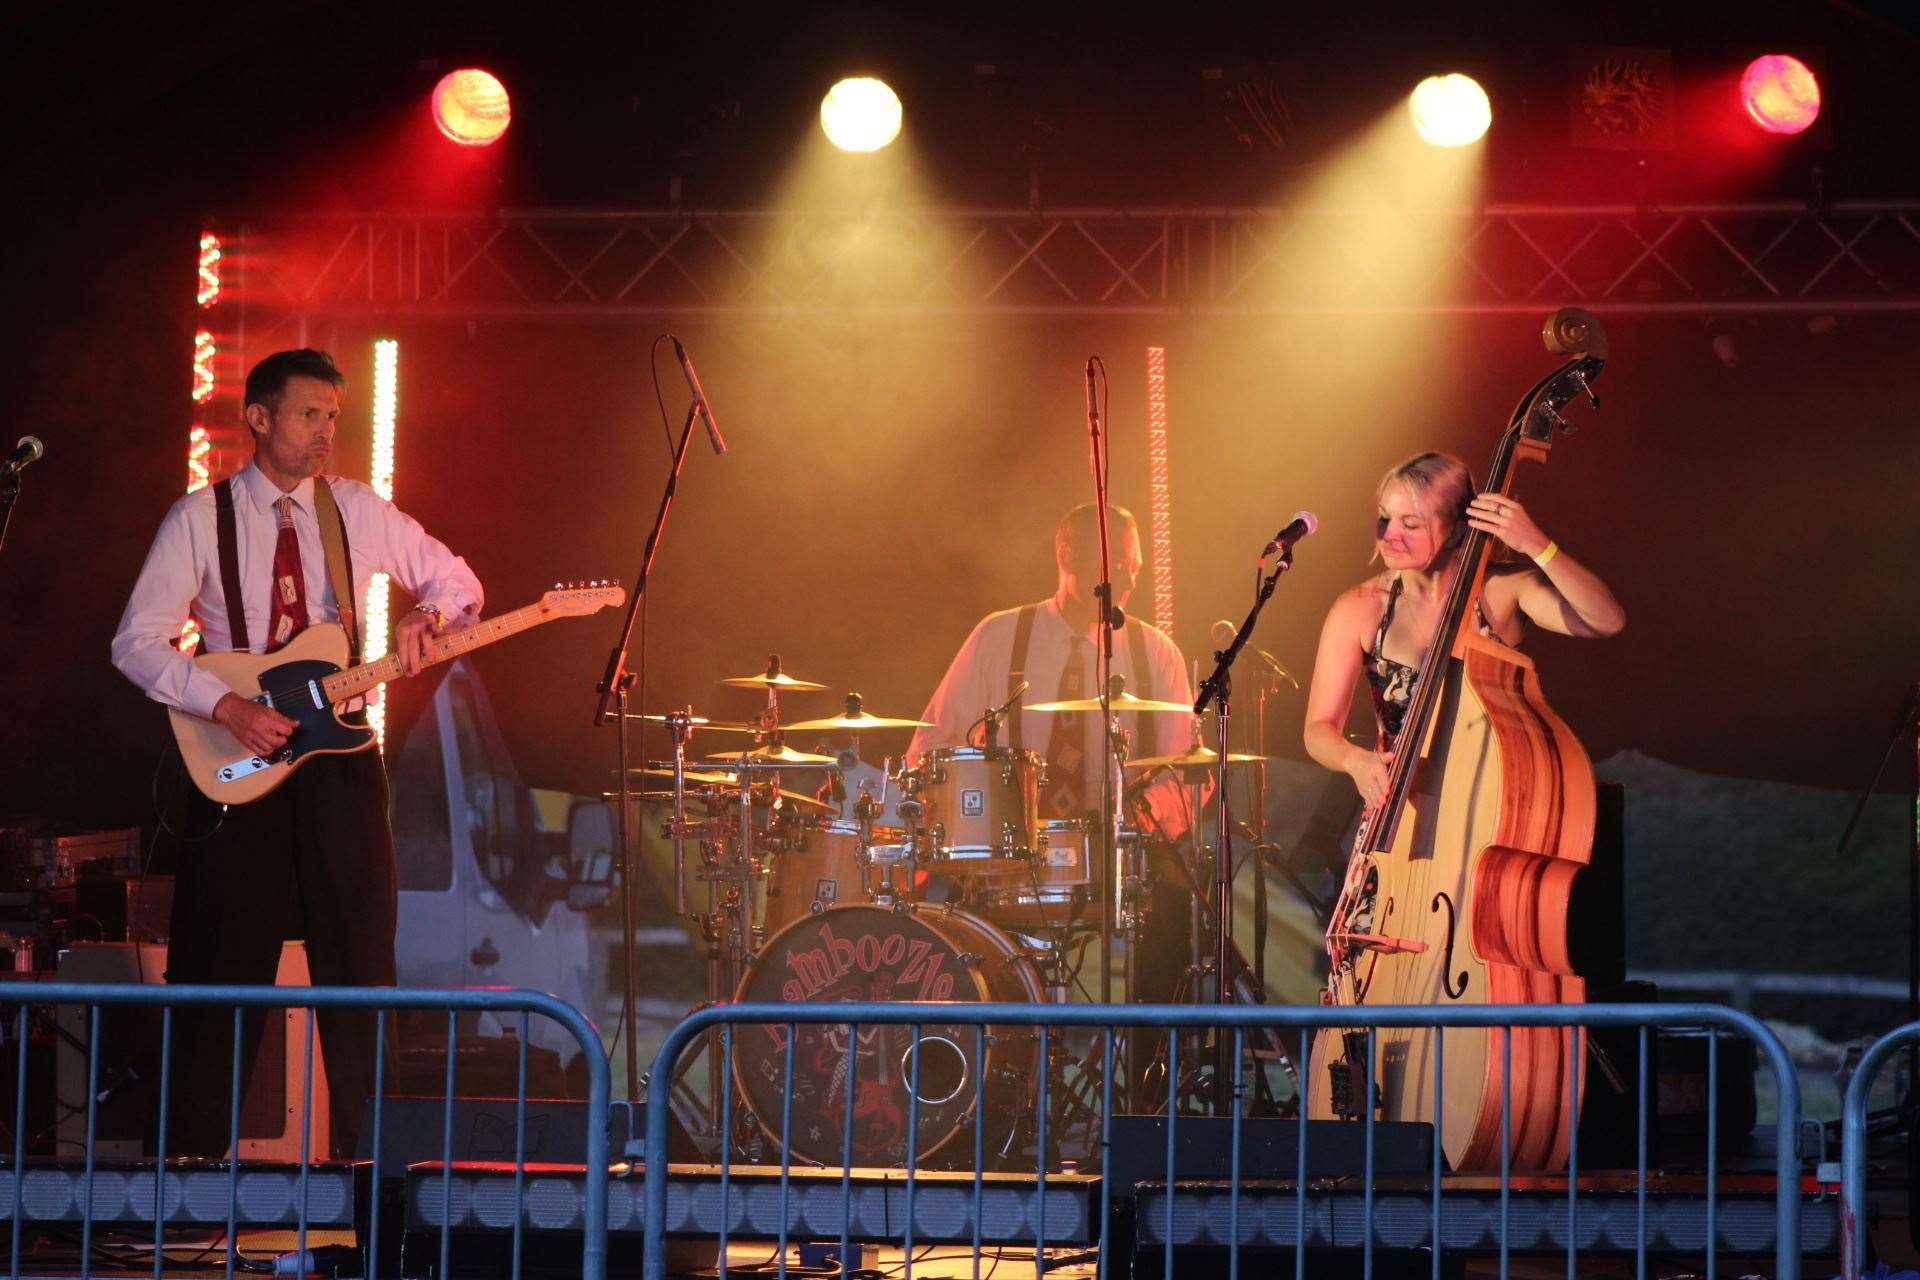 Bamboozle were at last year's Chickenstock music festival at Stockbury